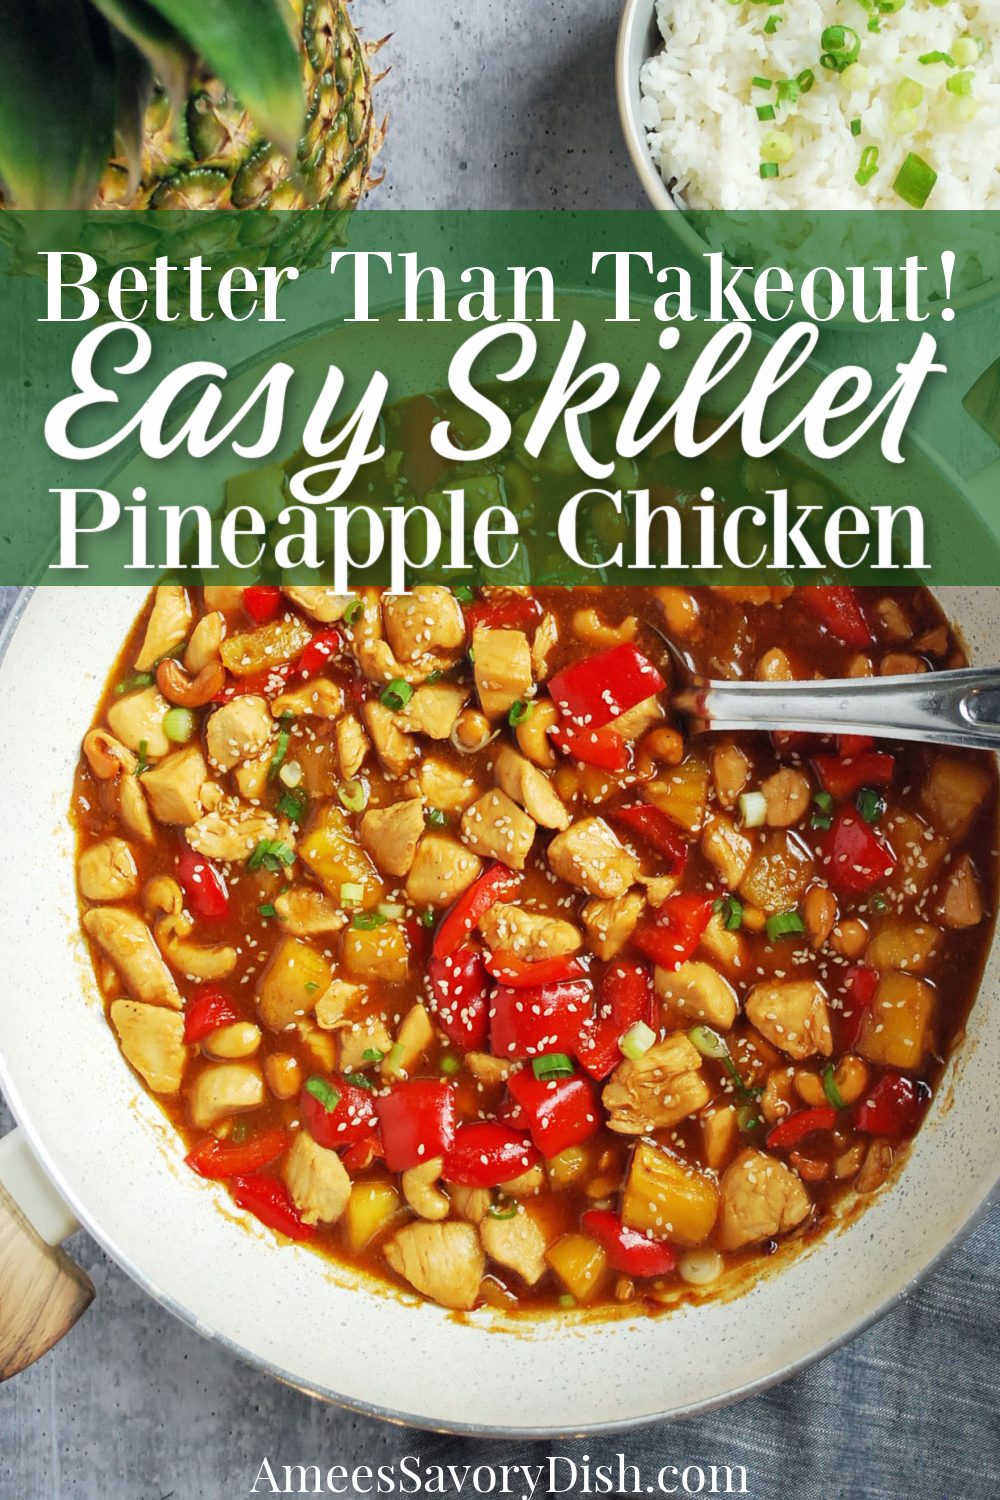 This healthier Chinese-style pineapple chicken is made with boneless chicken breast, red pepper, fresh pineapple, & cashews and ready in under 30 minutes.  #pineapplechicken #skilletchicken #chicken #chinesechicken #easyasian #chickenrecipe #skilletdinner via @Ameessavorydish